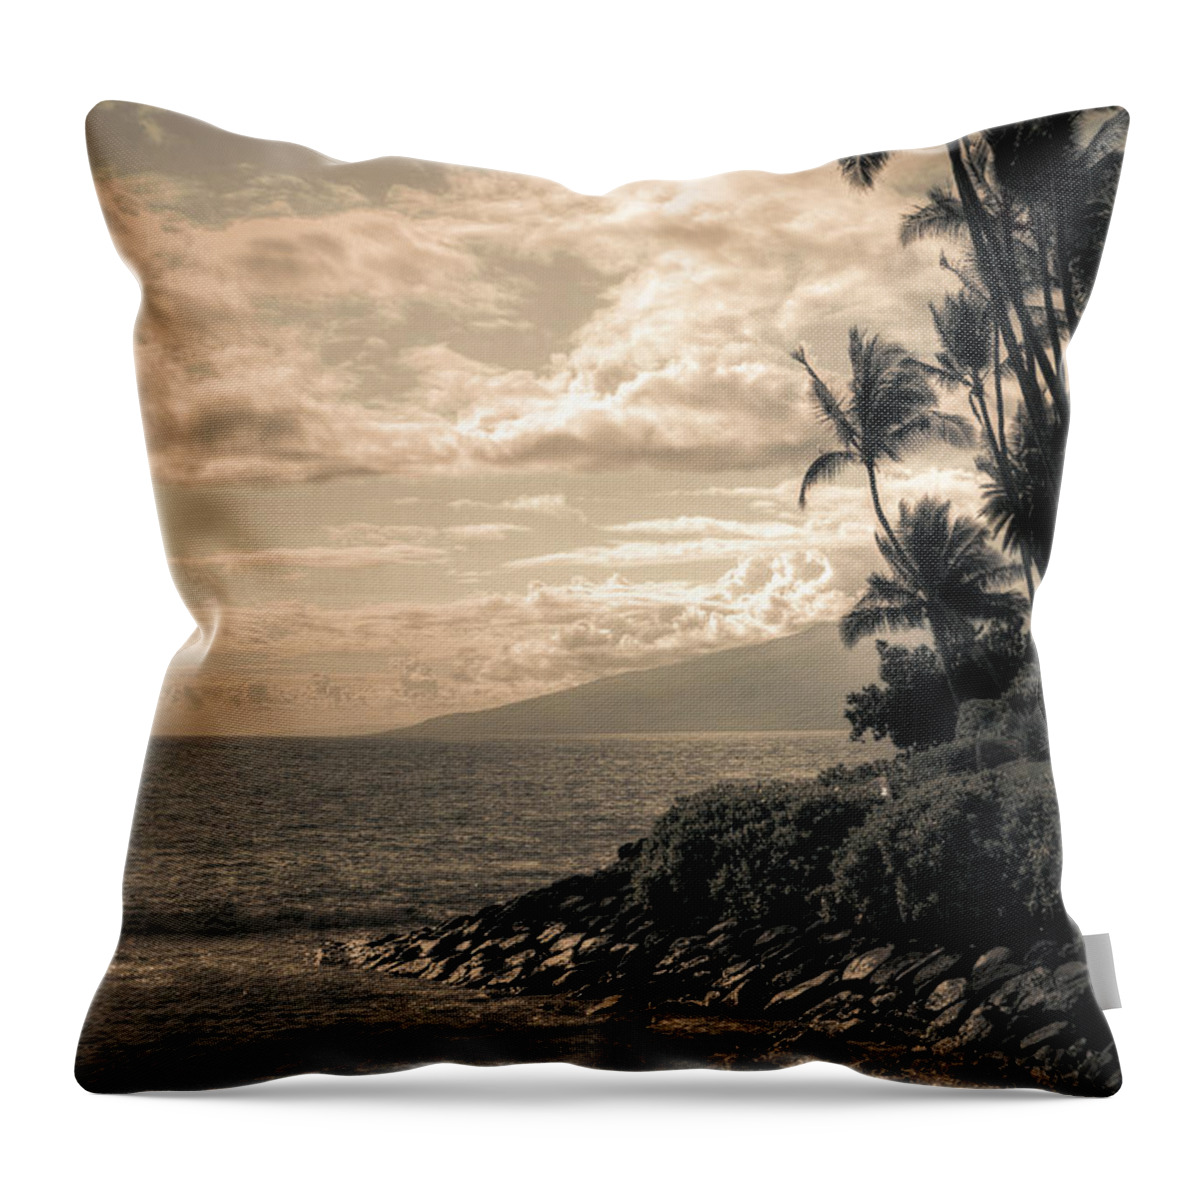 Napili Bay Throw Pillow featuring the photograph Napili Heaven by Kelly Wade